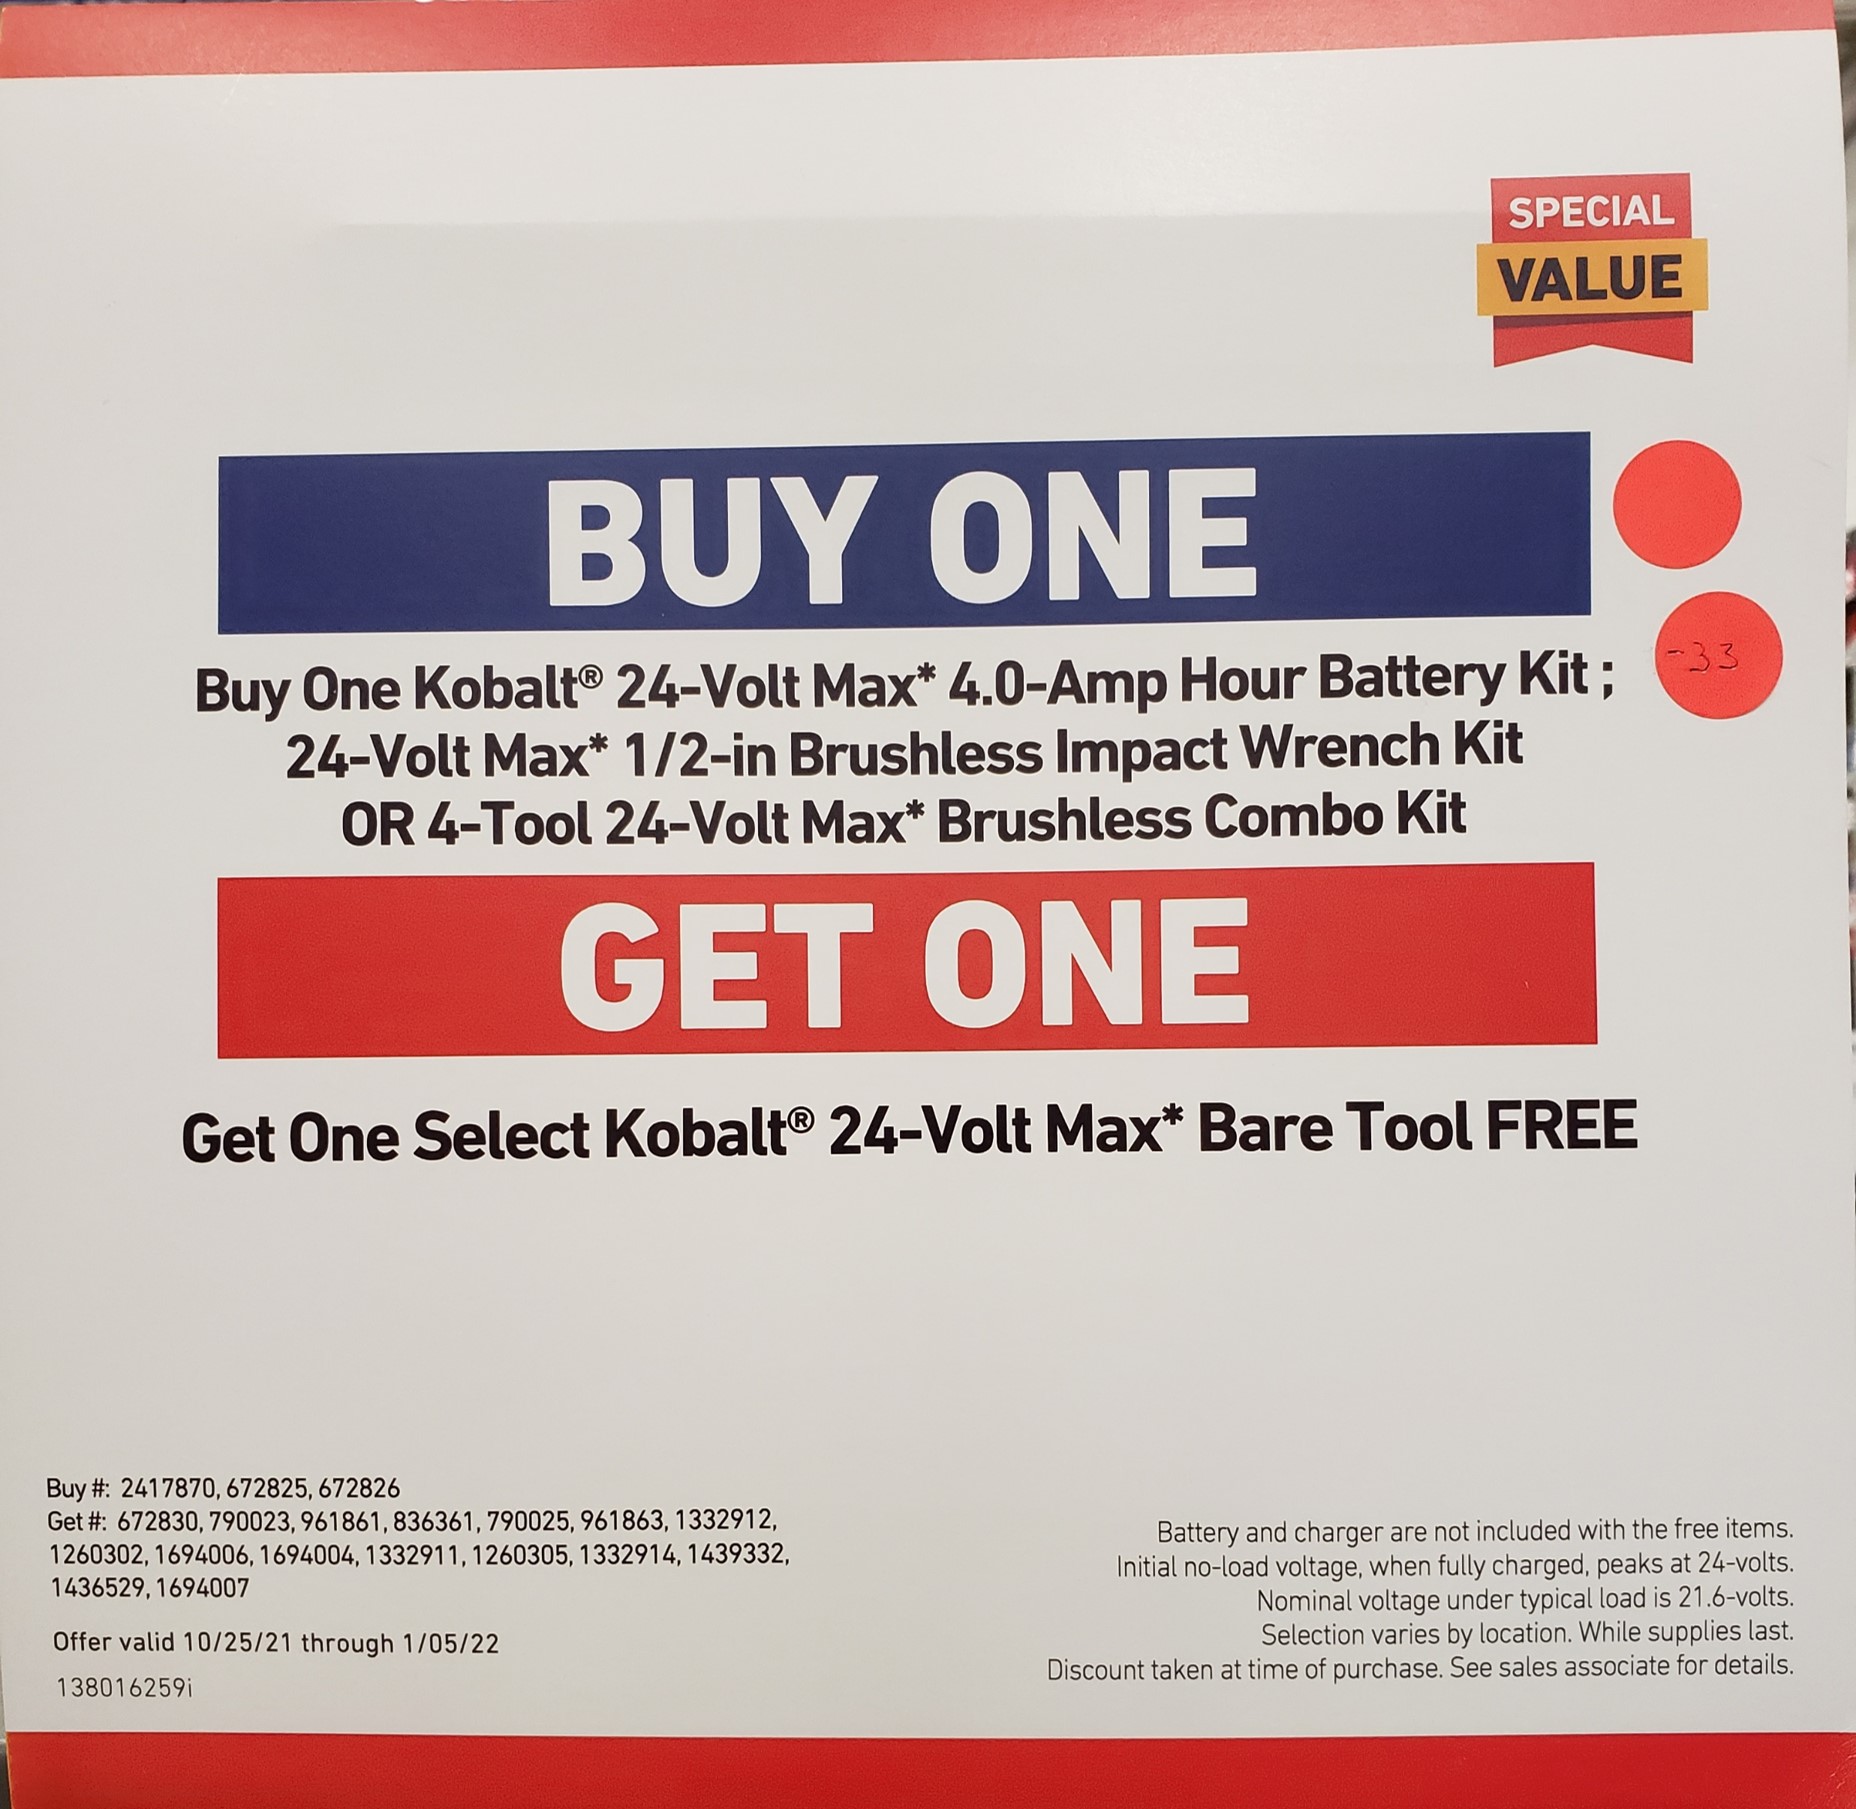 Lowe's in-store & online: Free Kobalt bare tool with $149 purchase of Kobalt 24-Volt Max battery kit (4.0Ah, 4.0Ah, 110W charger)